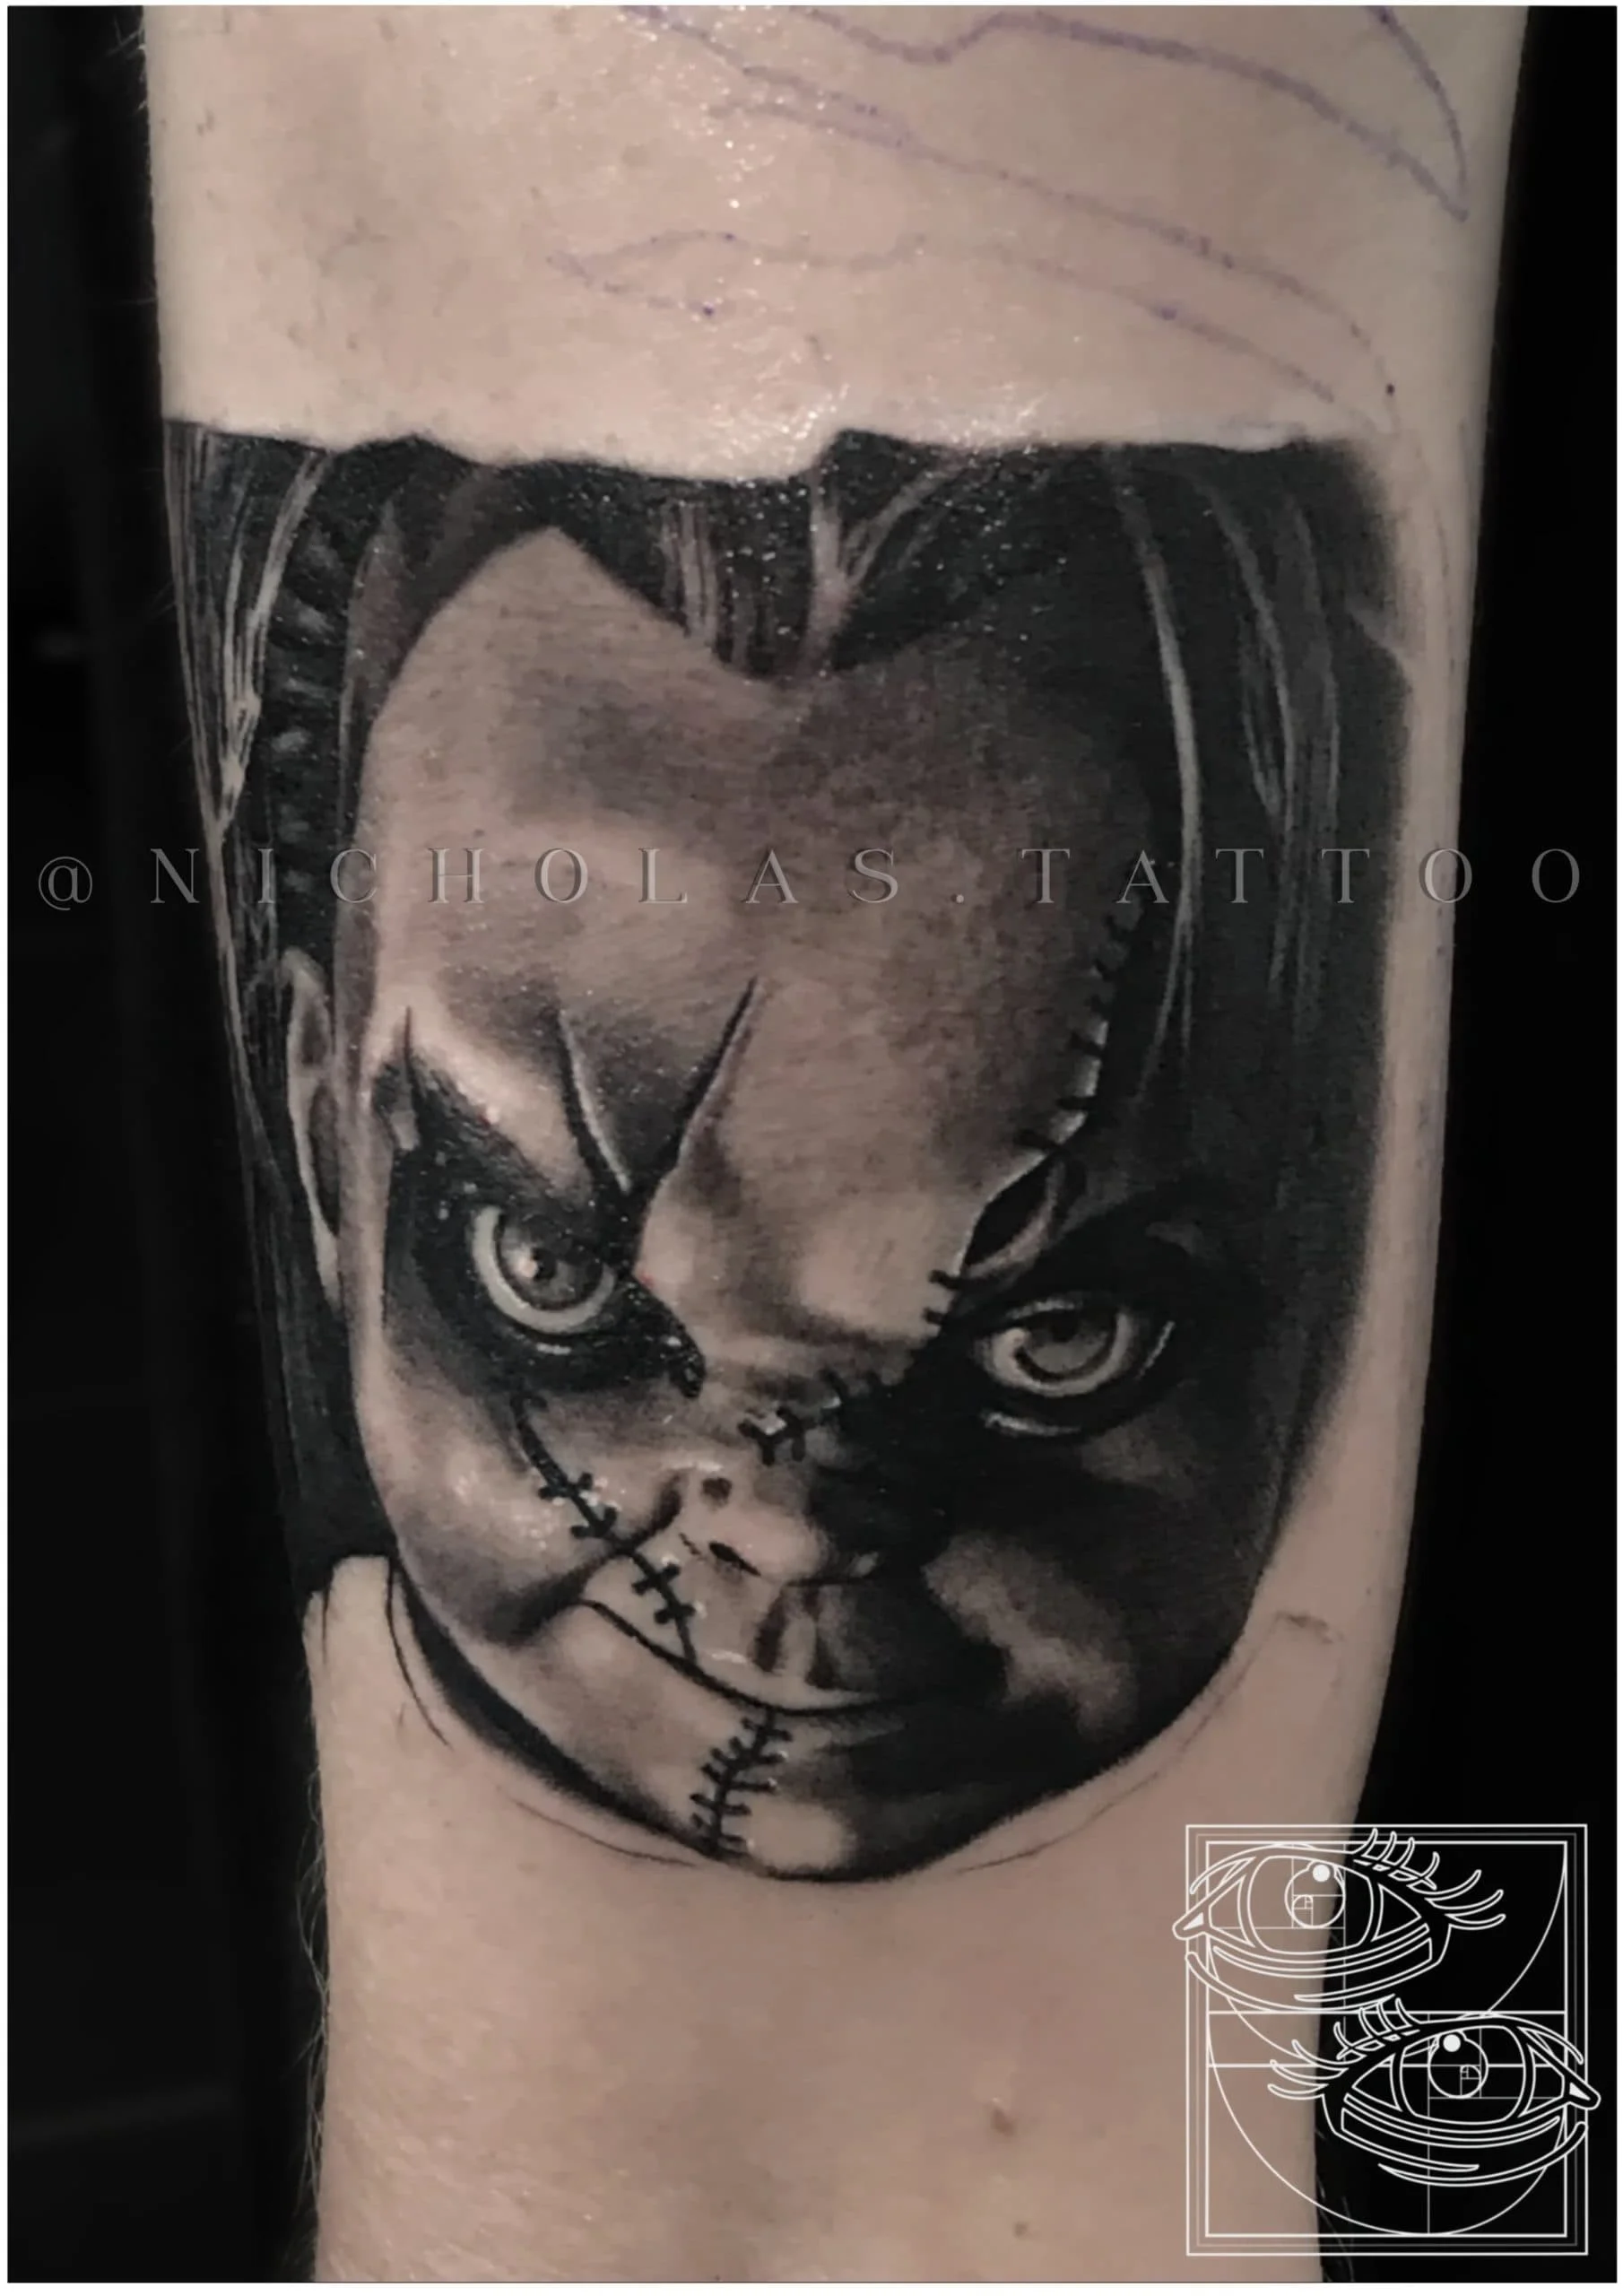 Jessica Wright Tattoo  Bride of Chucky hand jammer from a bit ago Ill be  back in the studio after the new year super stoked to get tattooing again     